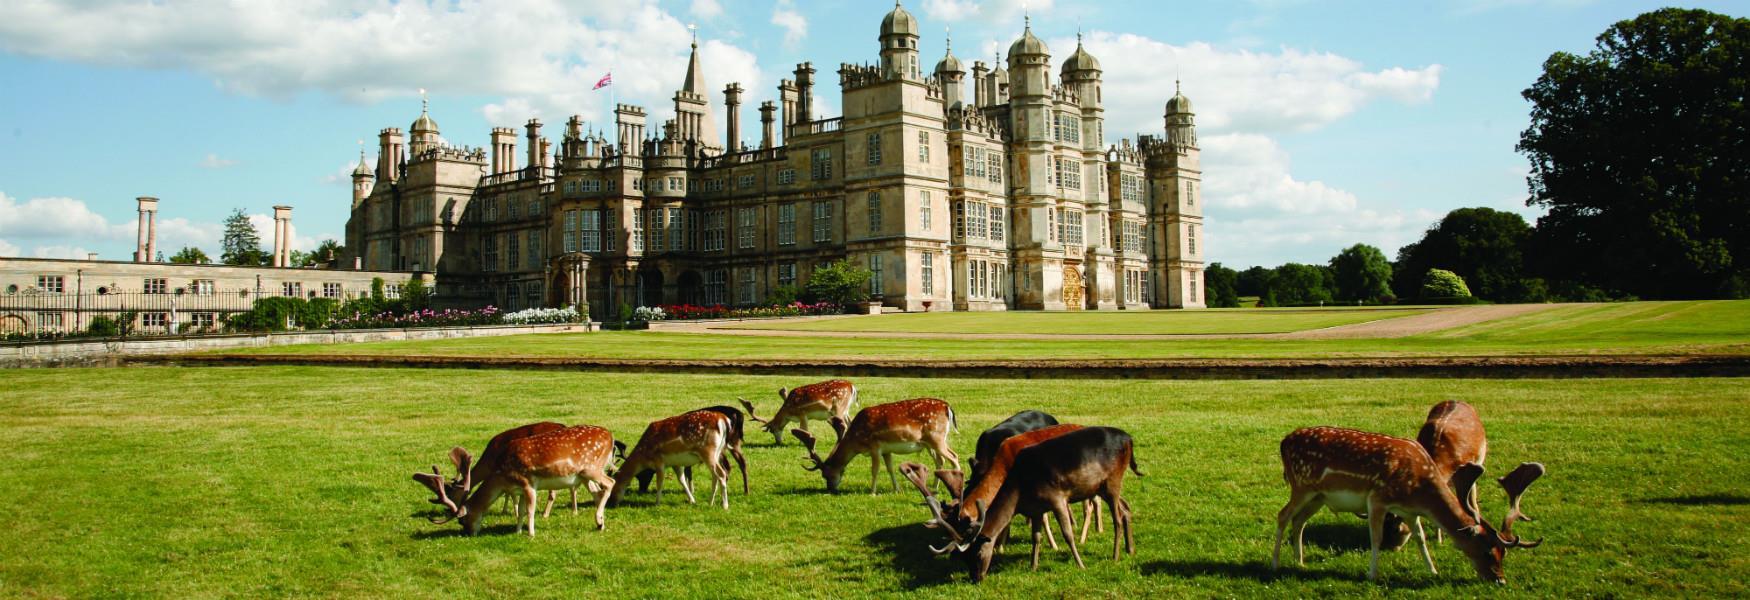 Deer in front of Burghley House